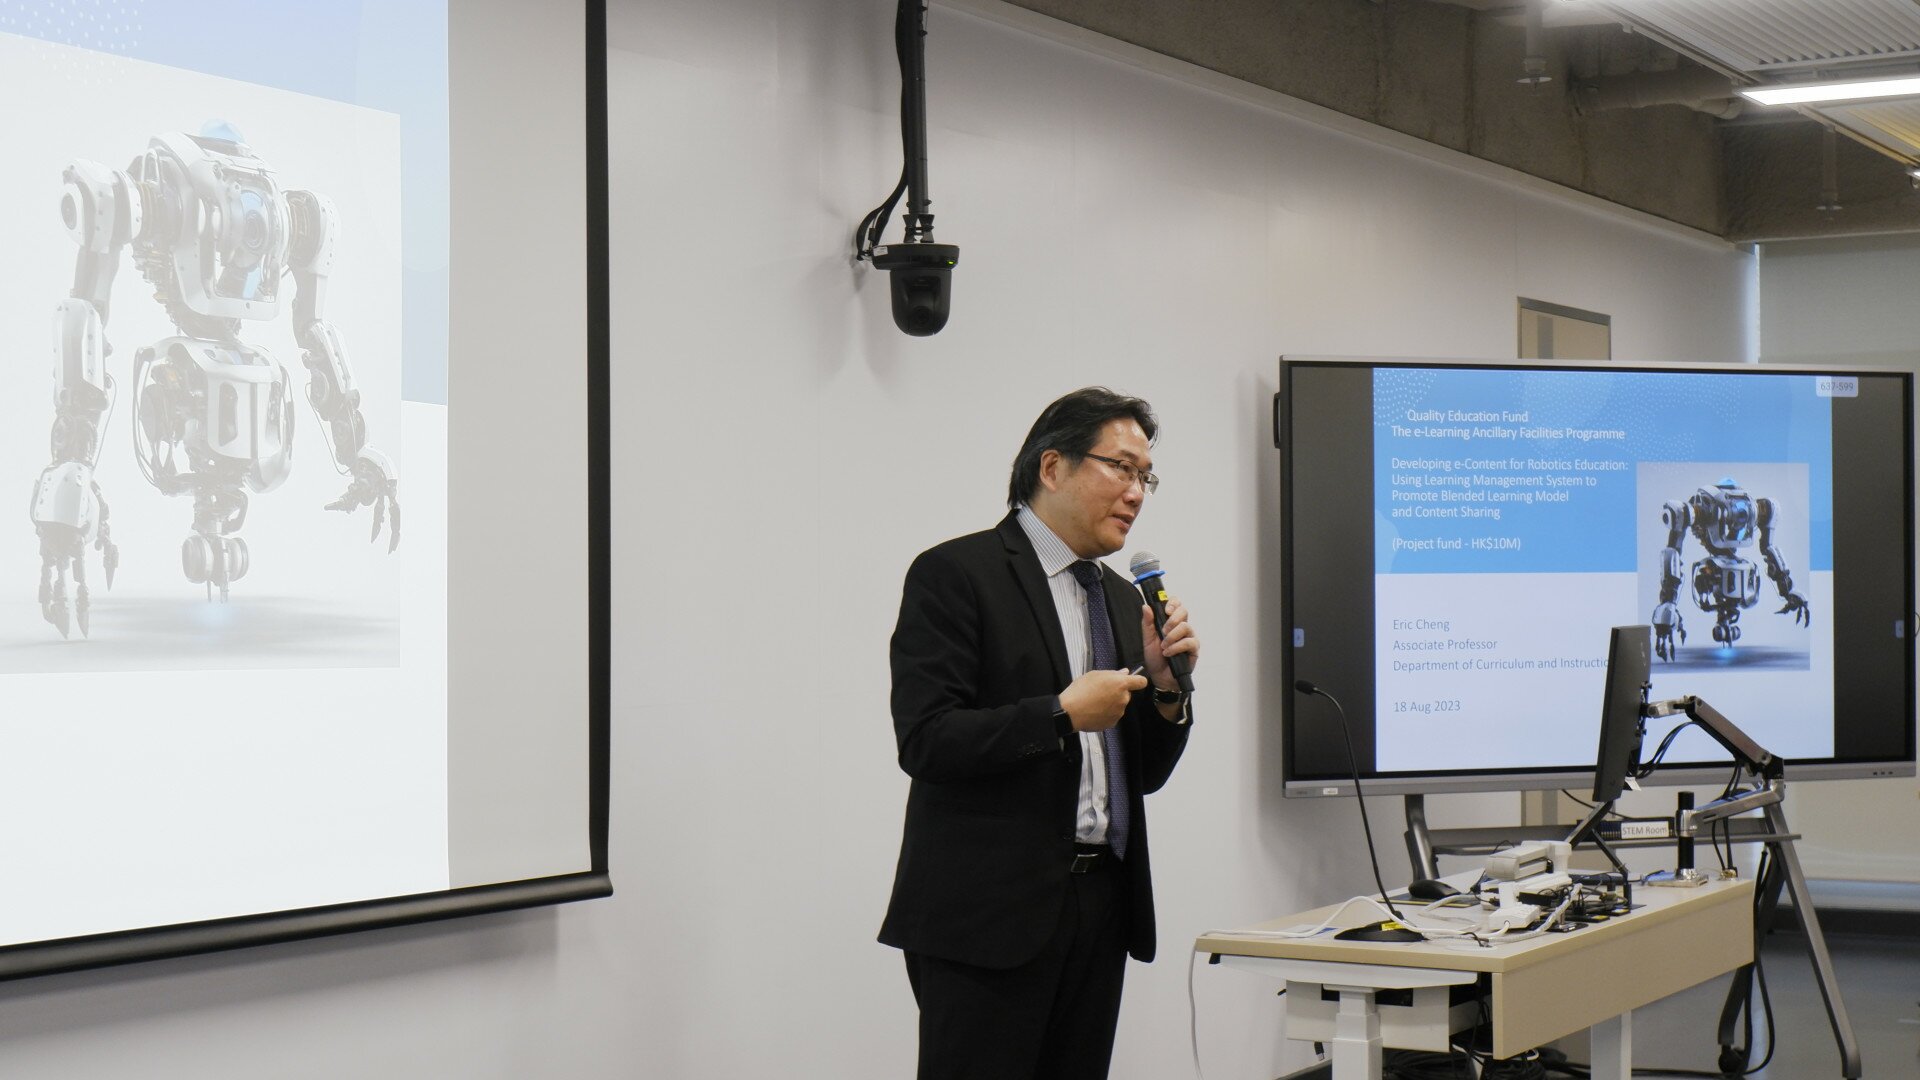 Presentation session by Dr Eric Cheng Chi-keung, Associate Professor, Department of Curriculum and Instruction, and Associate Dean of Quality Assurance and Enhancement, Faculty of Education and Human Development